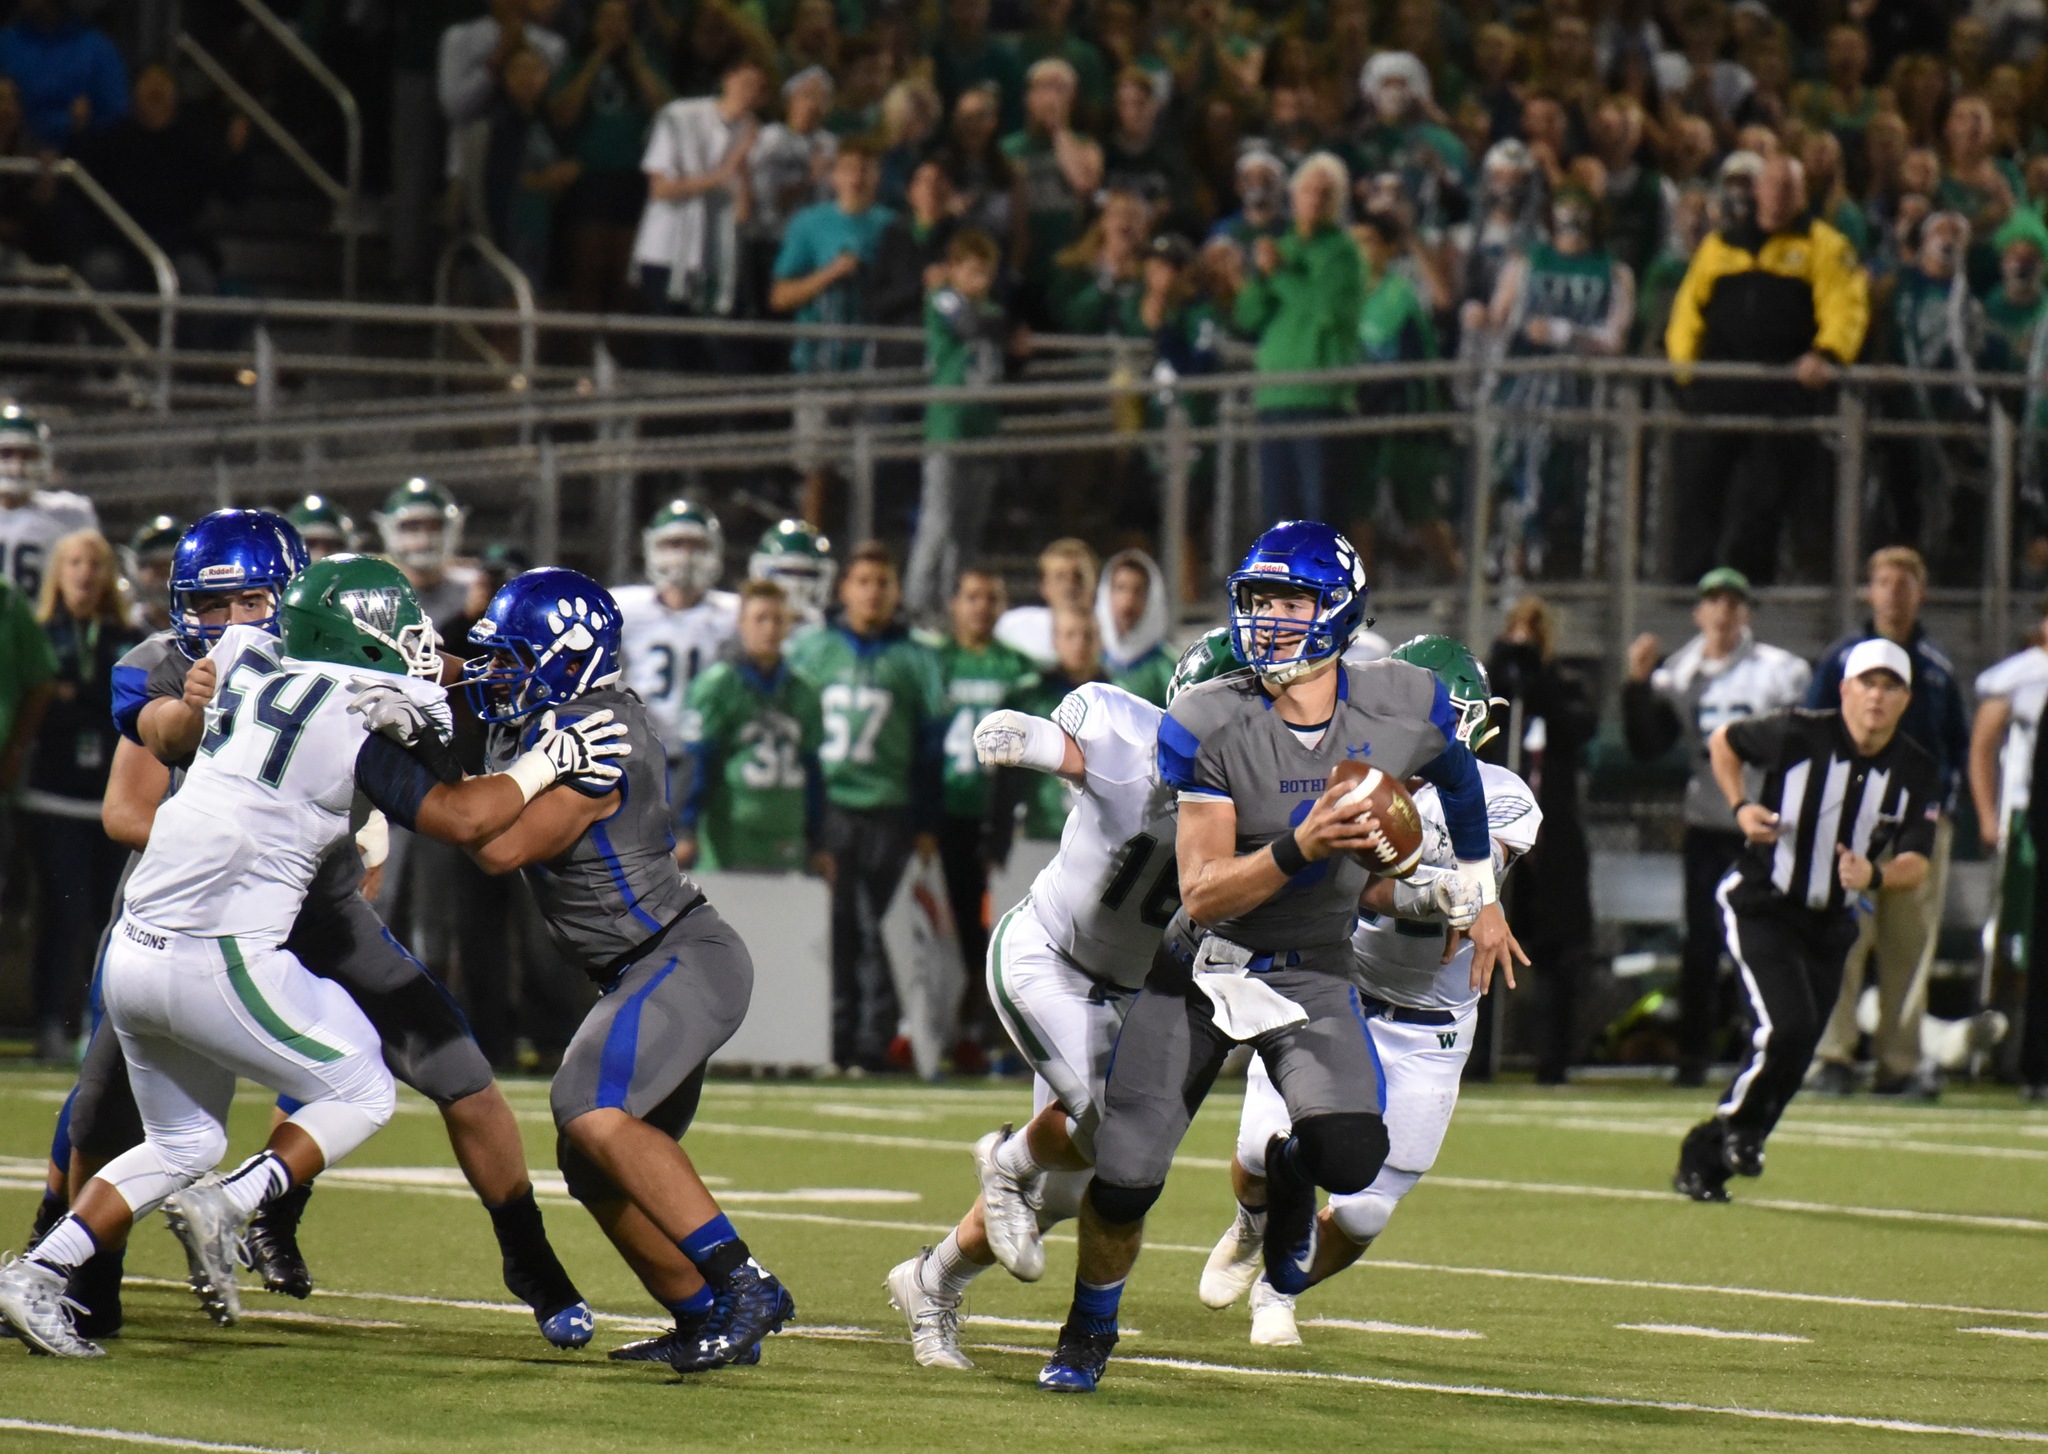 Bothell quarterback Jacob Sirmon is chased by a pair of Woodinville defensive lineman in the first half of Friday’s 17-10 Bothell loss at Pop Keeney Stadium. Photo courtesy of Greg Nelson.